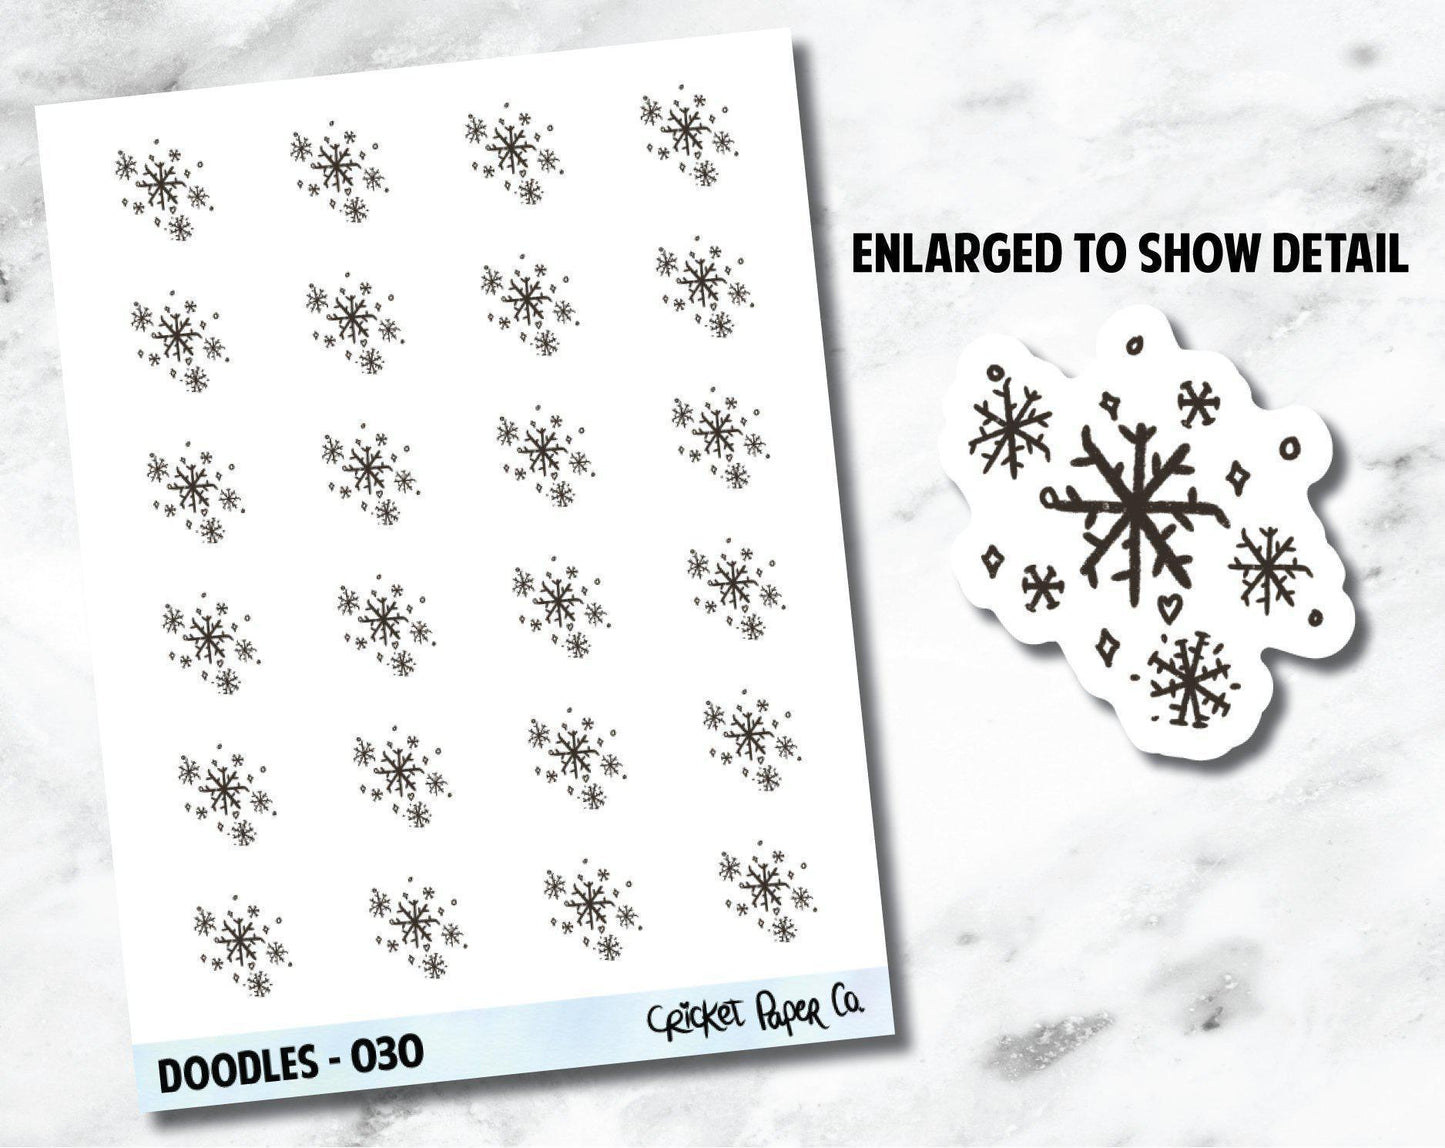 Snowflakes, Snow, Snowy Weather Hand Drawn Doodles - 030-Cricket Paper Co.